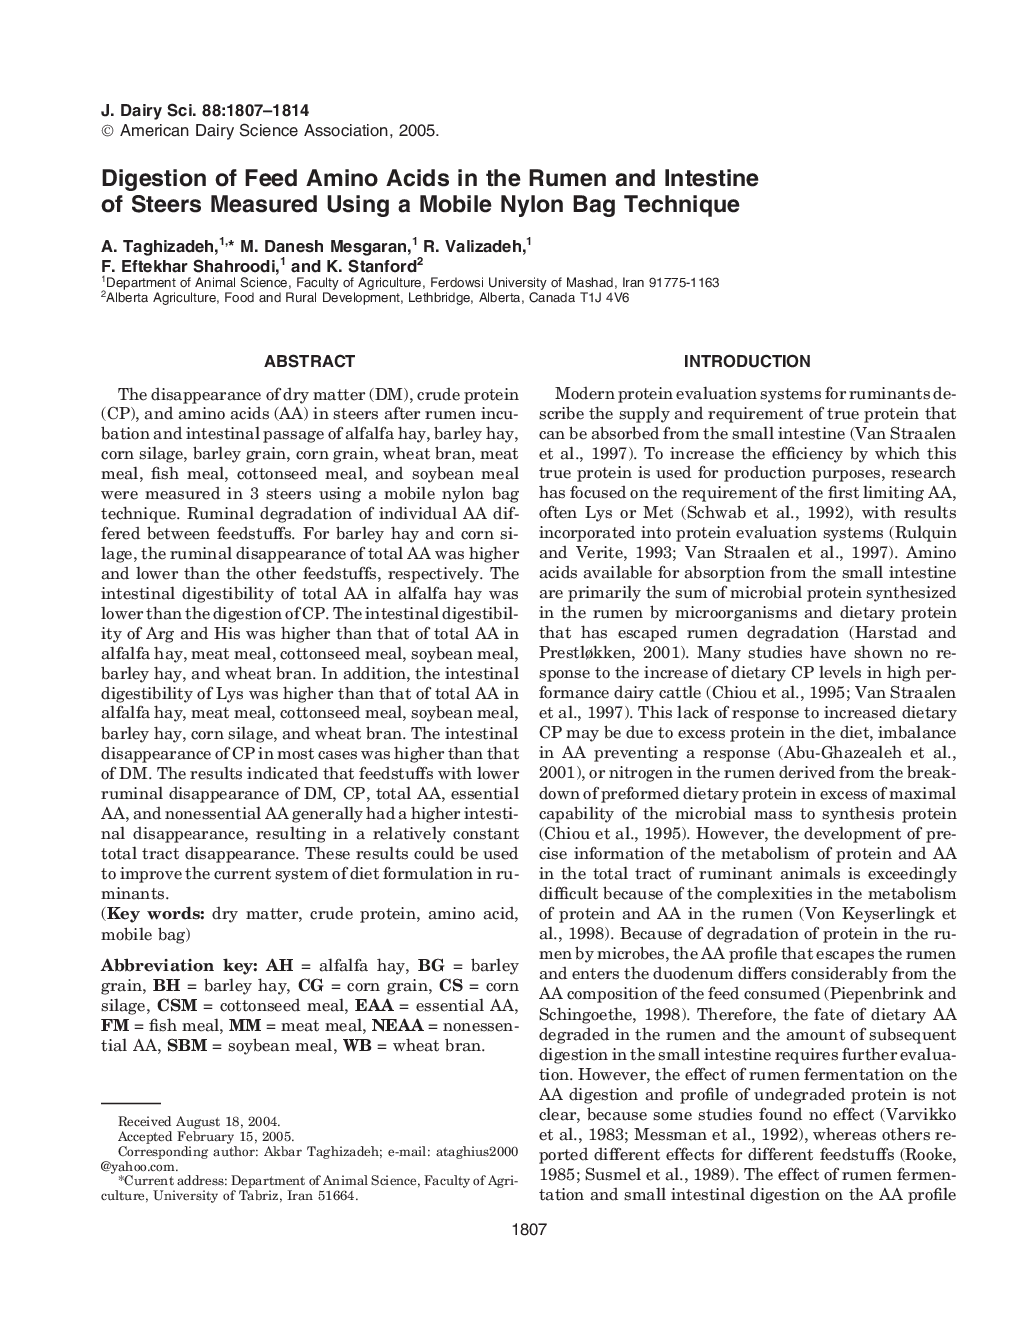 Digestion of Feed Amino Acids in the Rumen and Intestine of Steers Measured Using a Mobile Nylon Bag Technique